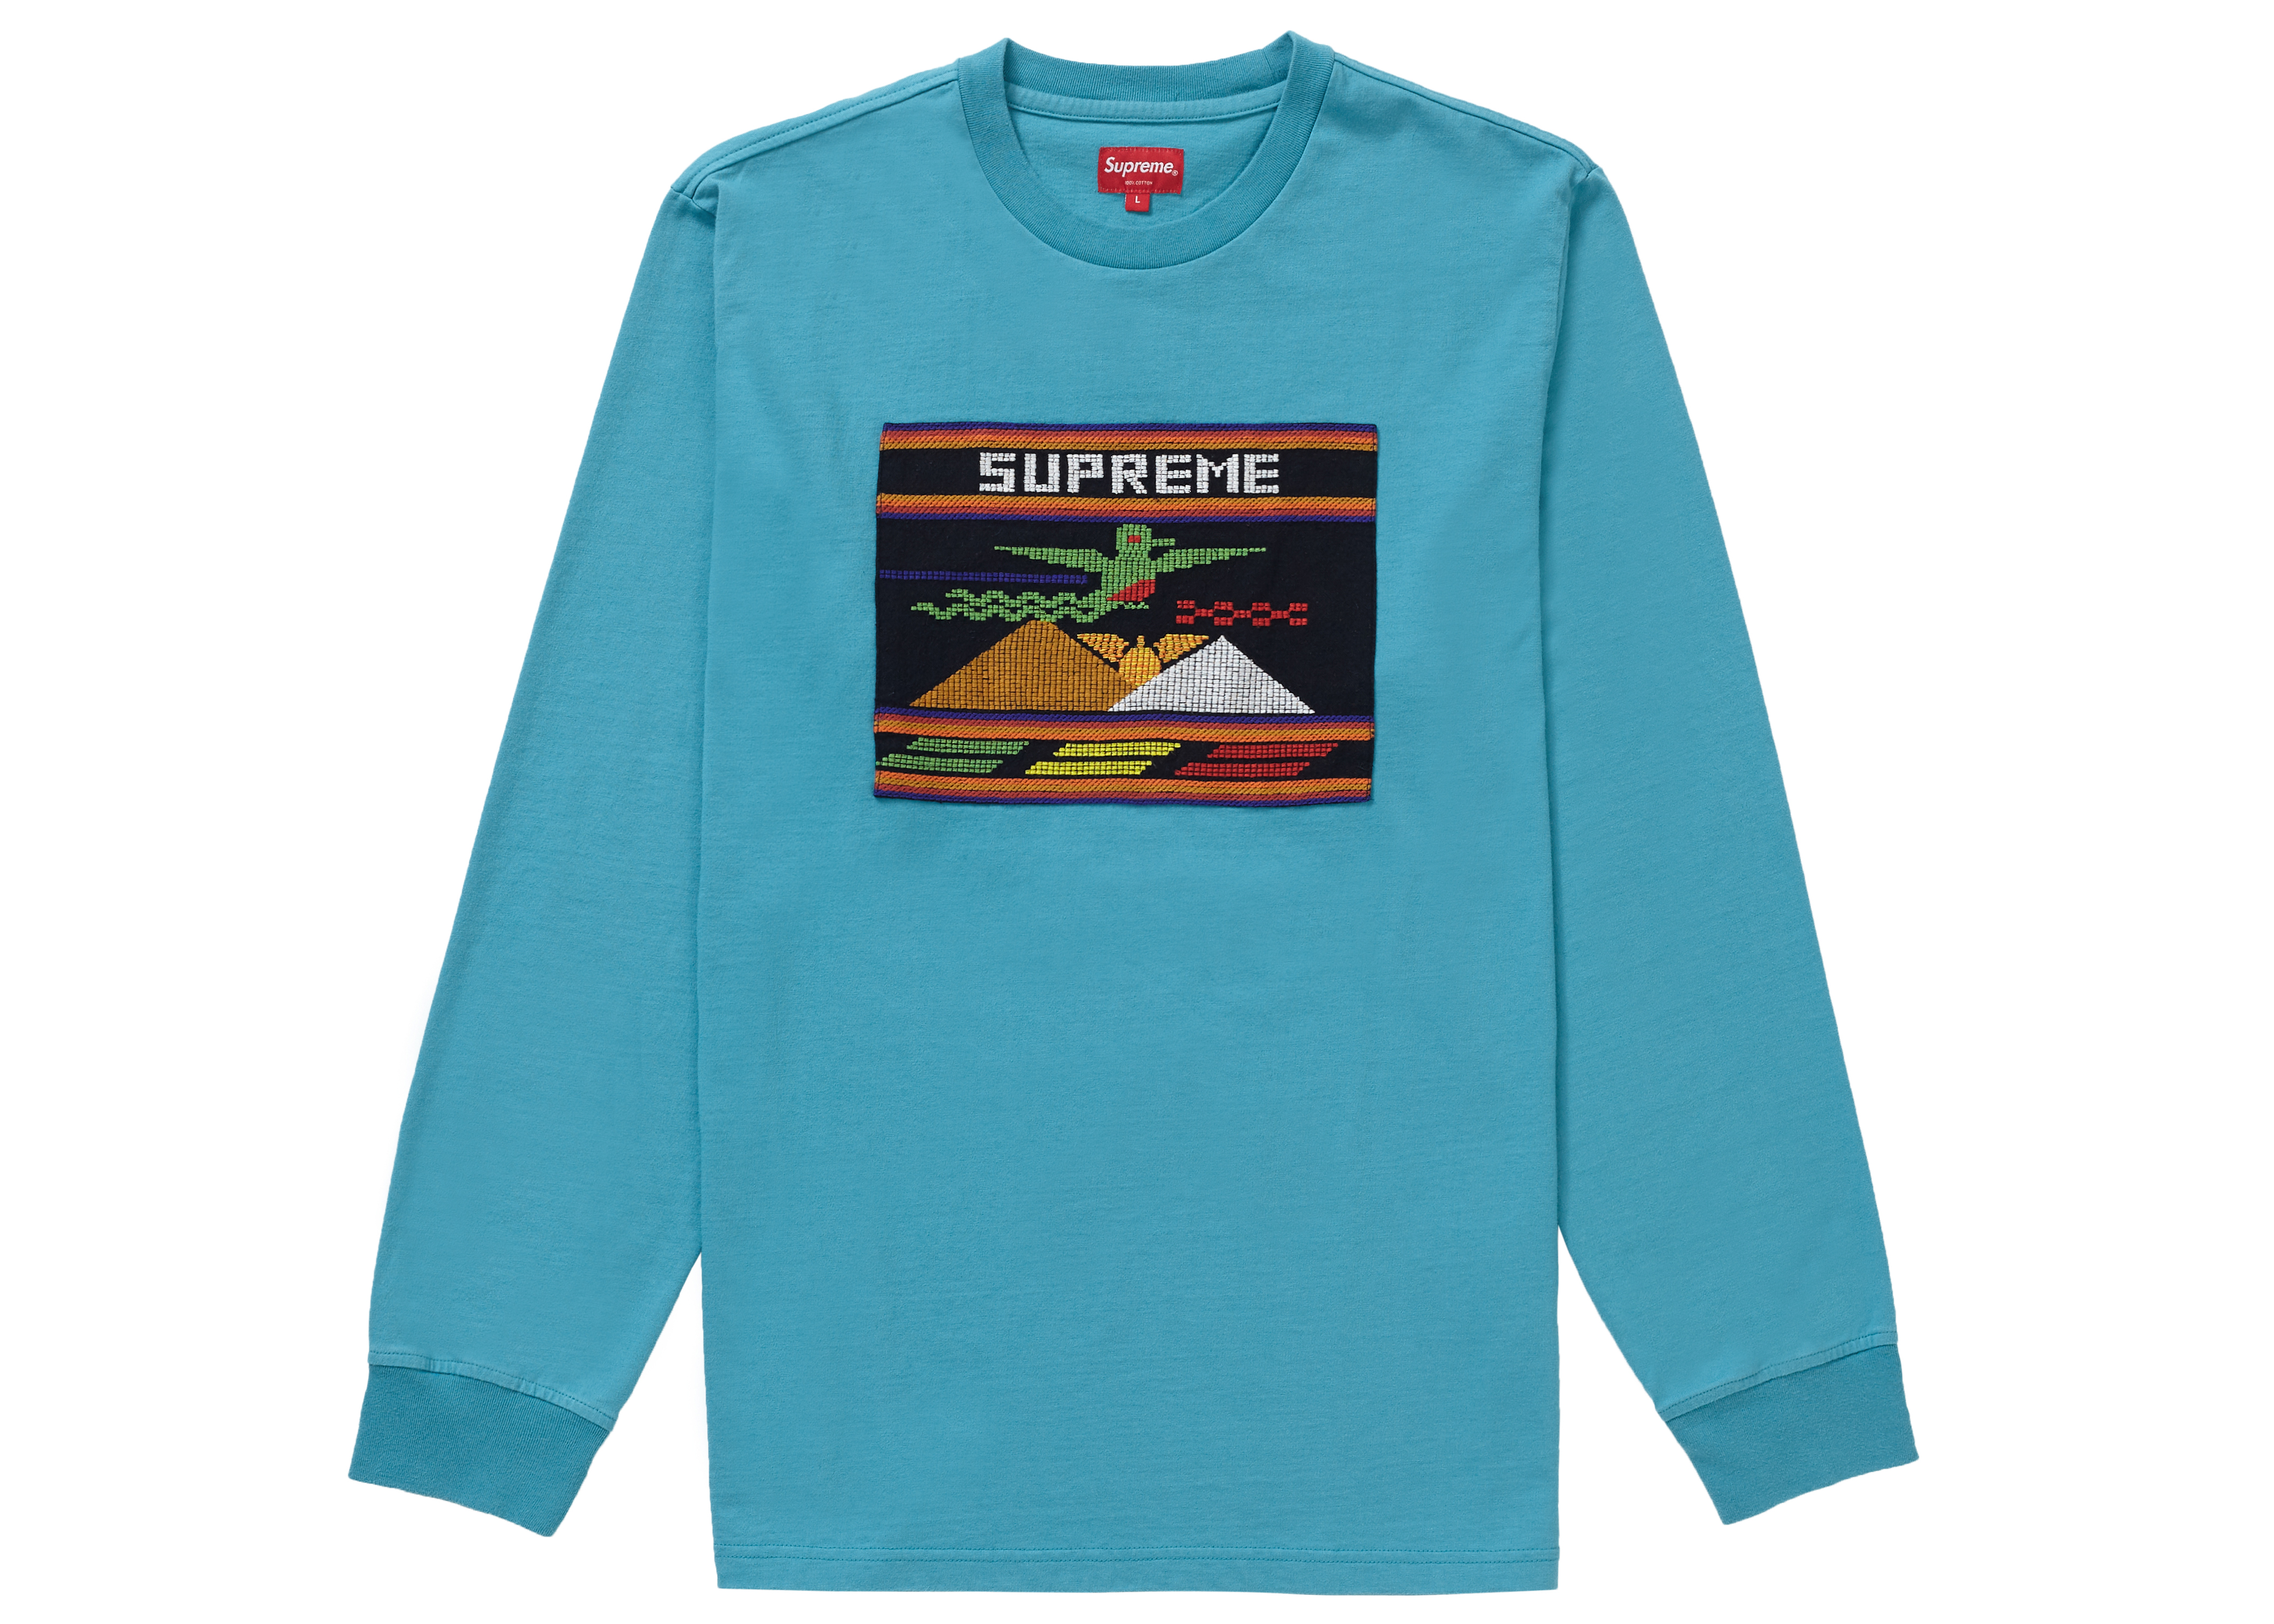 Supreme Needlepoint Patch L/S Top Dusty Teal Men's - SS19 - US